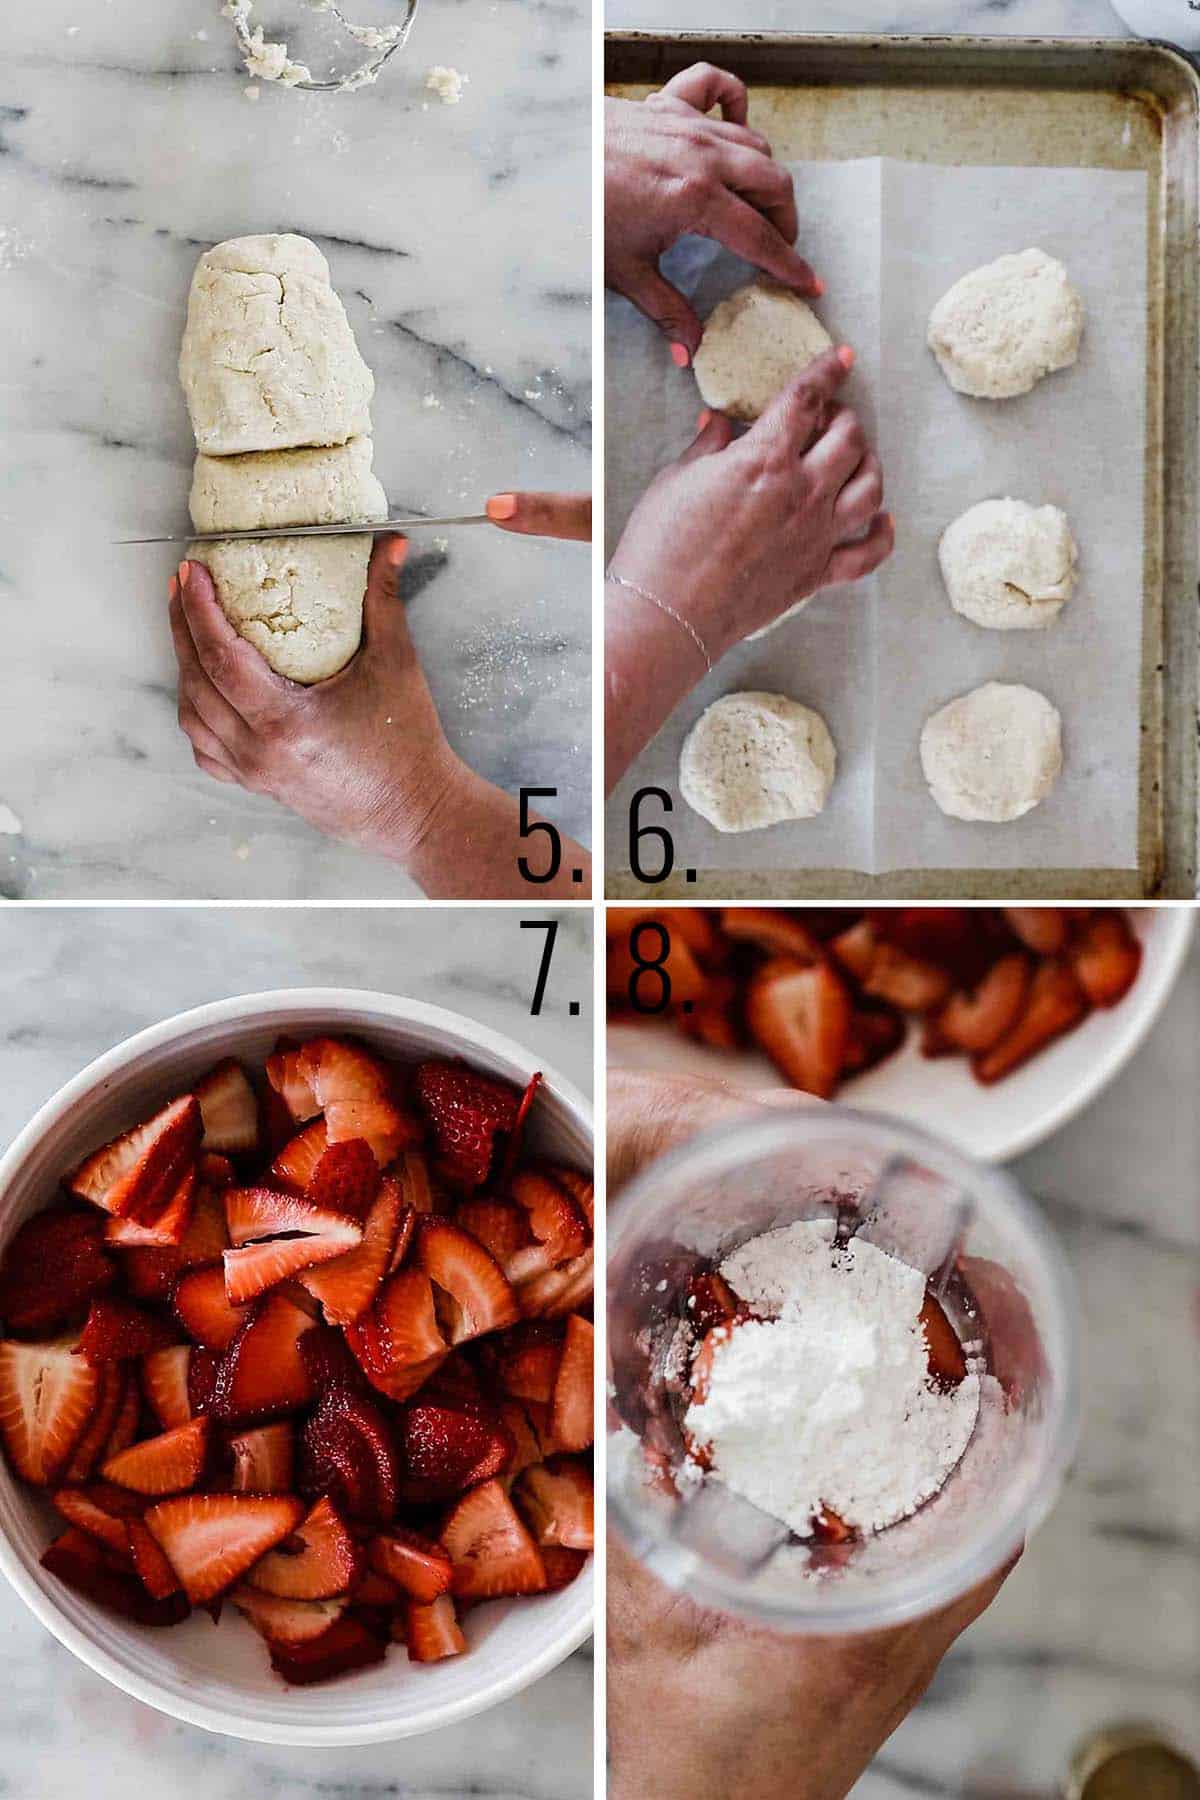 A collage of images showing cutting the shortcakes, laying them on a pan, strawberries in a bowl and some in a blender with powdered sugar.